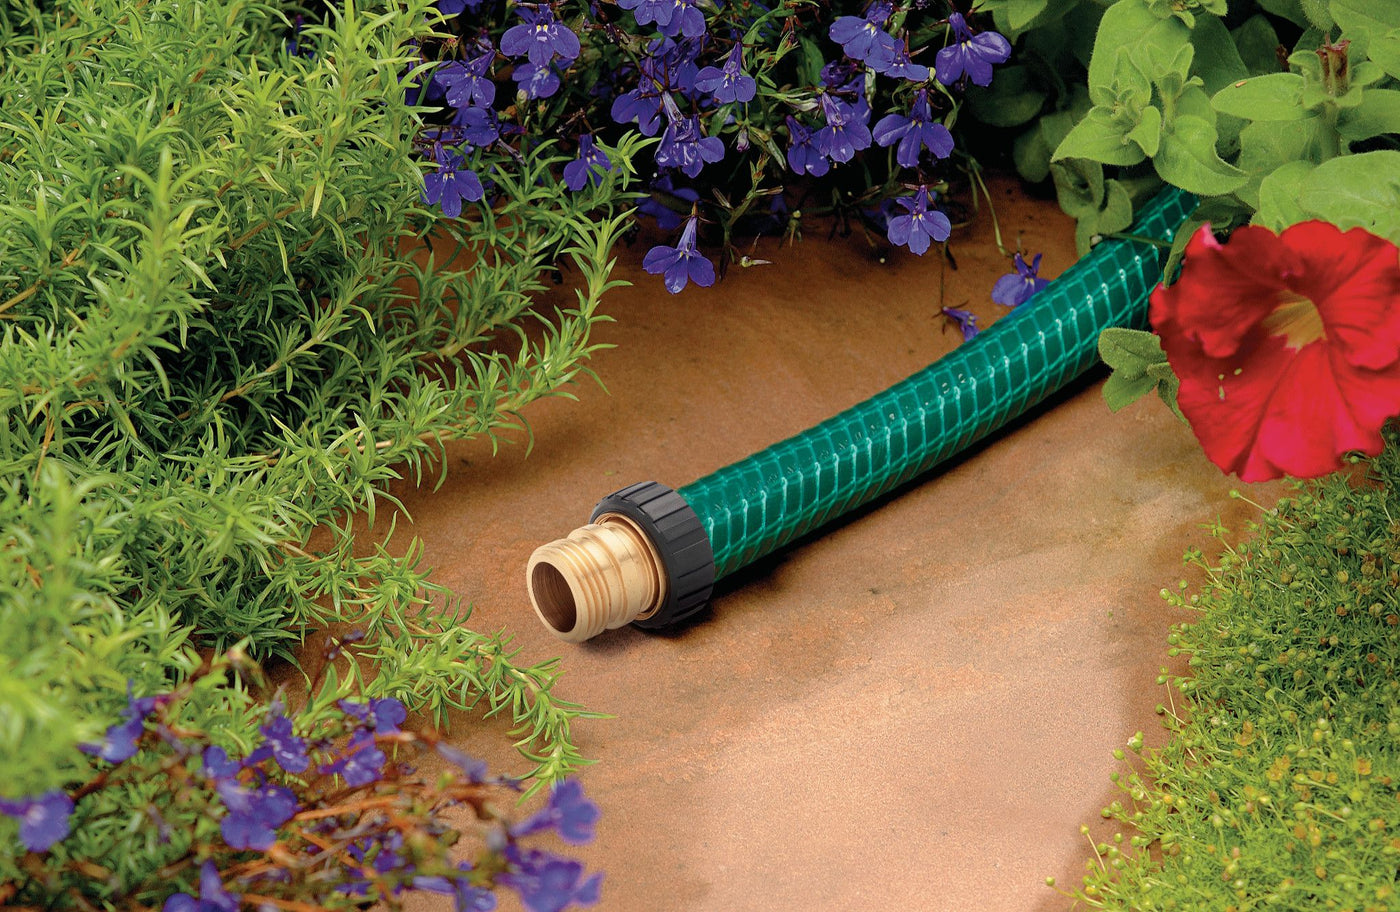 A green garden hose placed in a flower garden that has been repaired with a heavy-duty 5/8-in. brass male hose mender.